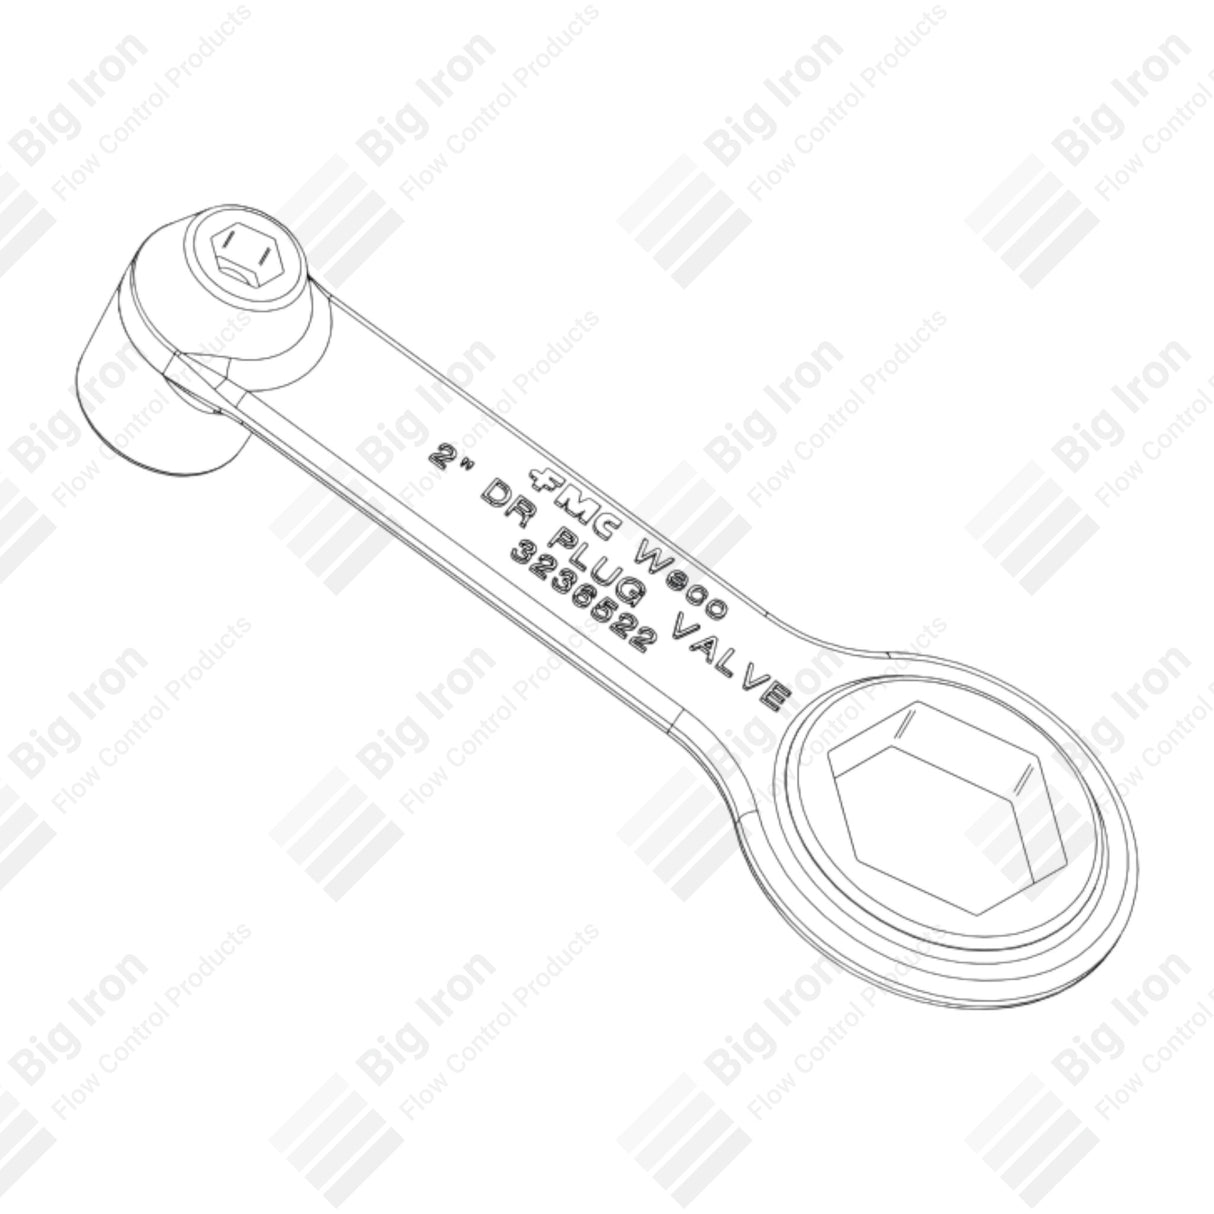 Plug Valve Wrench, FMC TE, 1.5" DR150 & 2" DR50-DR100